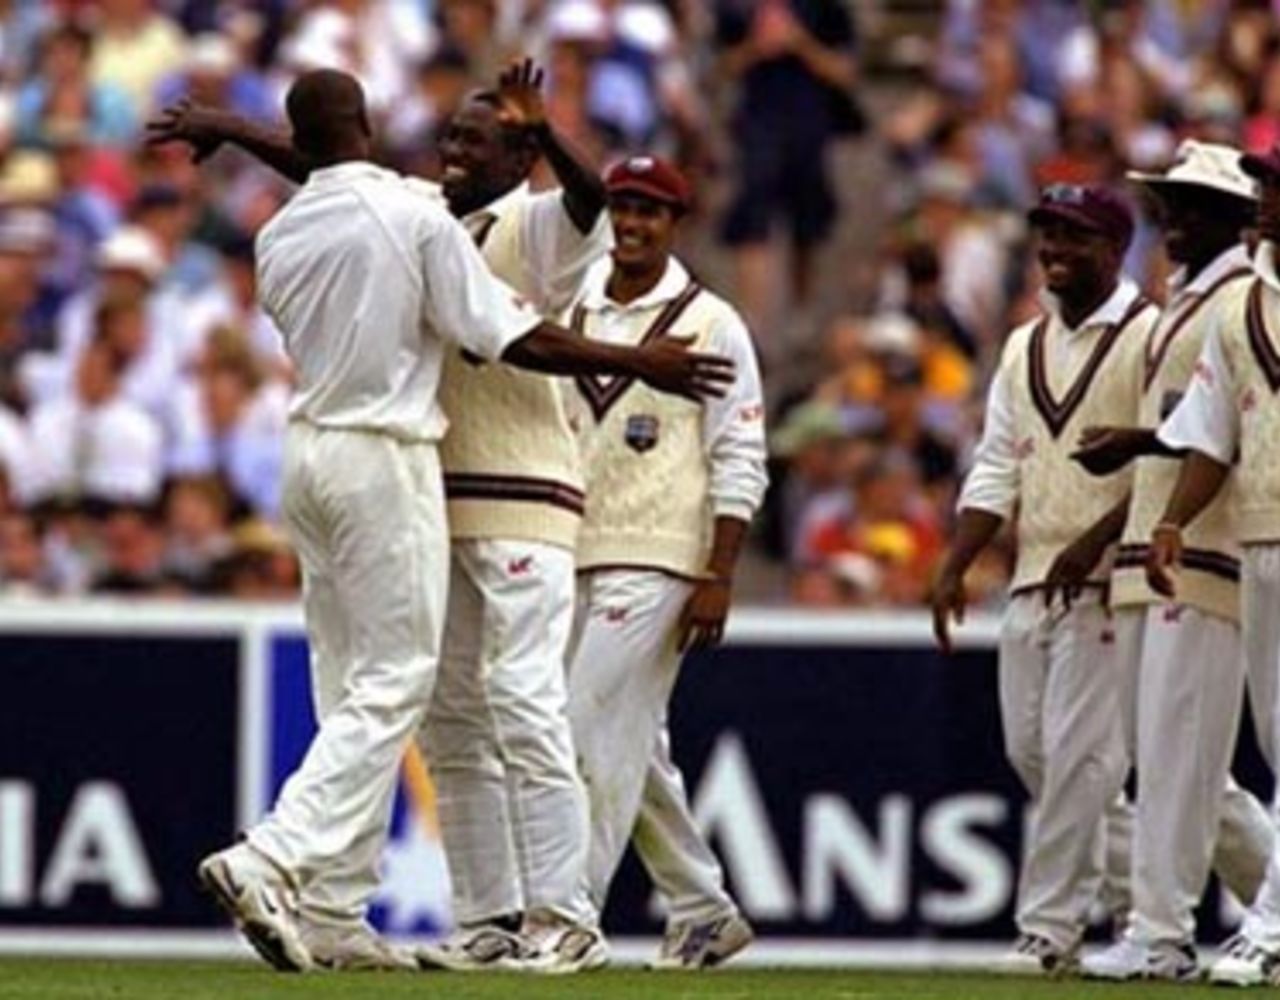 4th Test Match in the Australia v West Indies 2000/01 series played at the MCG 26 December 2000